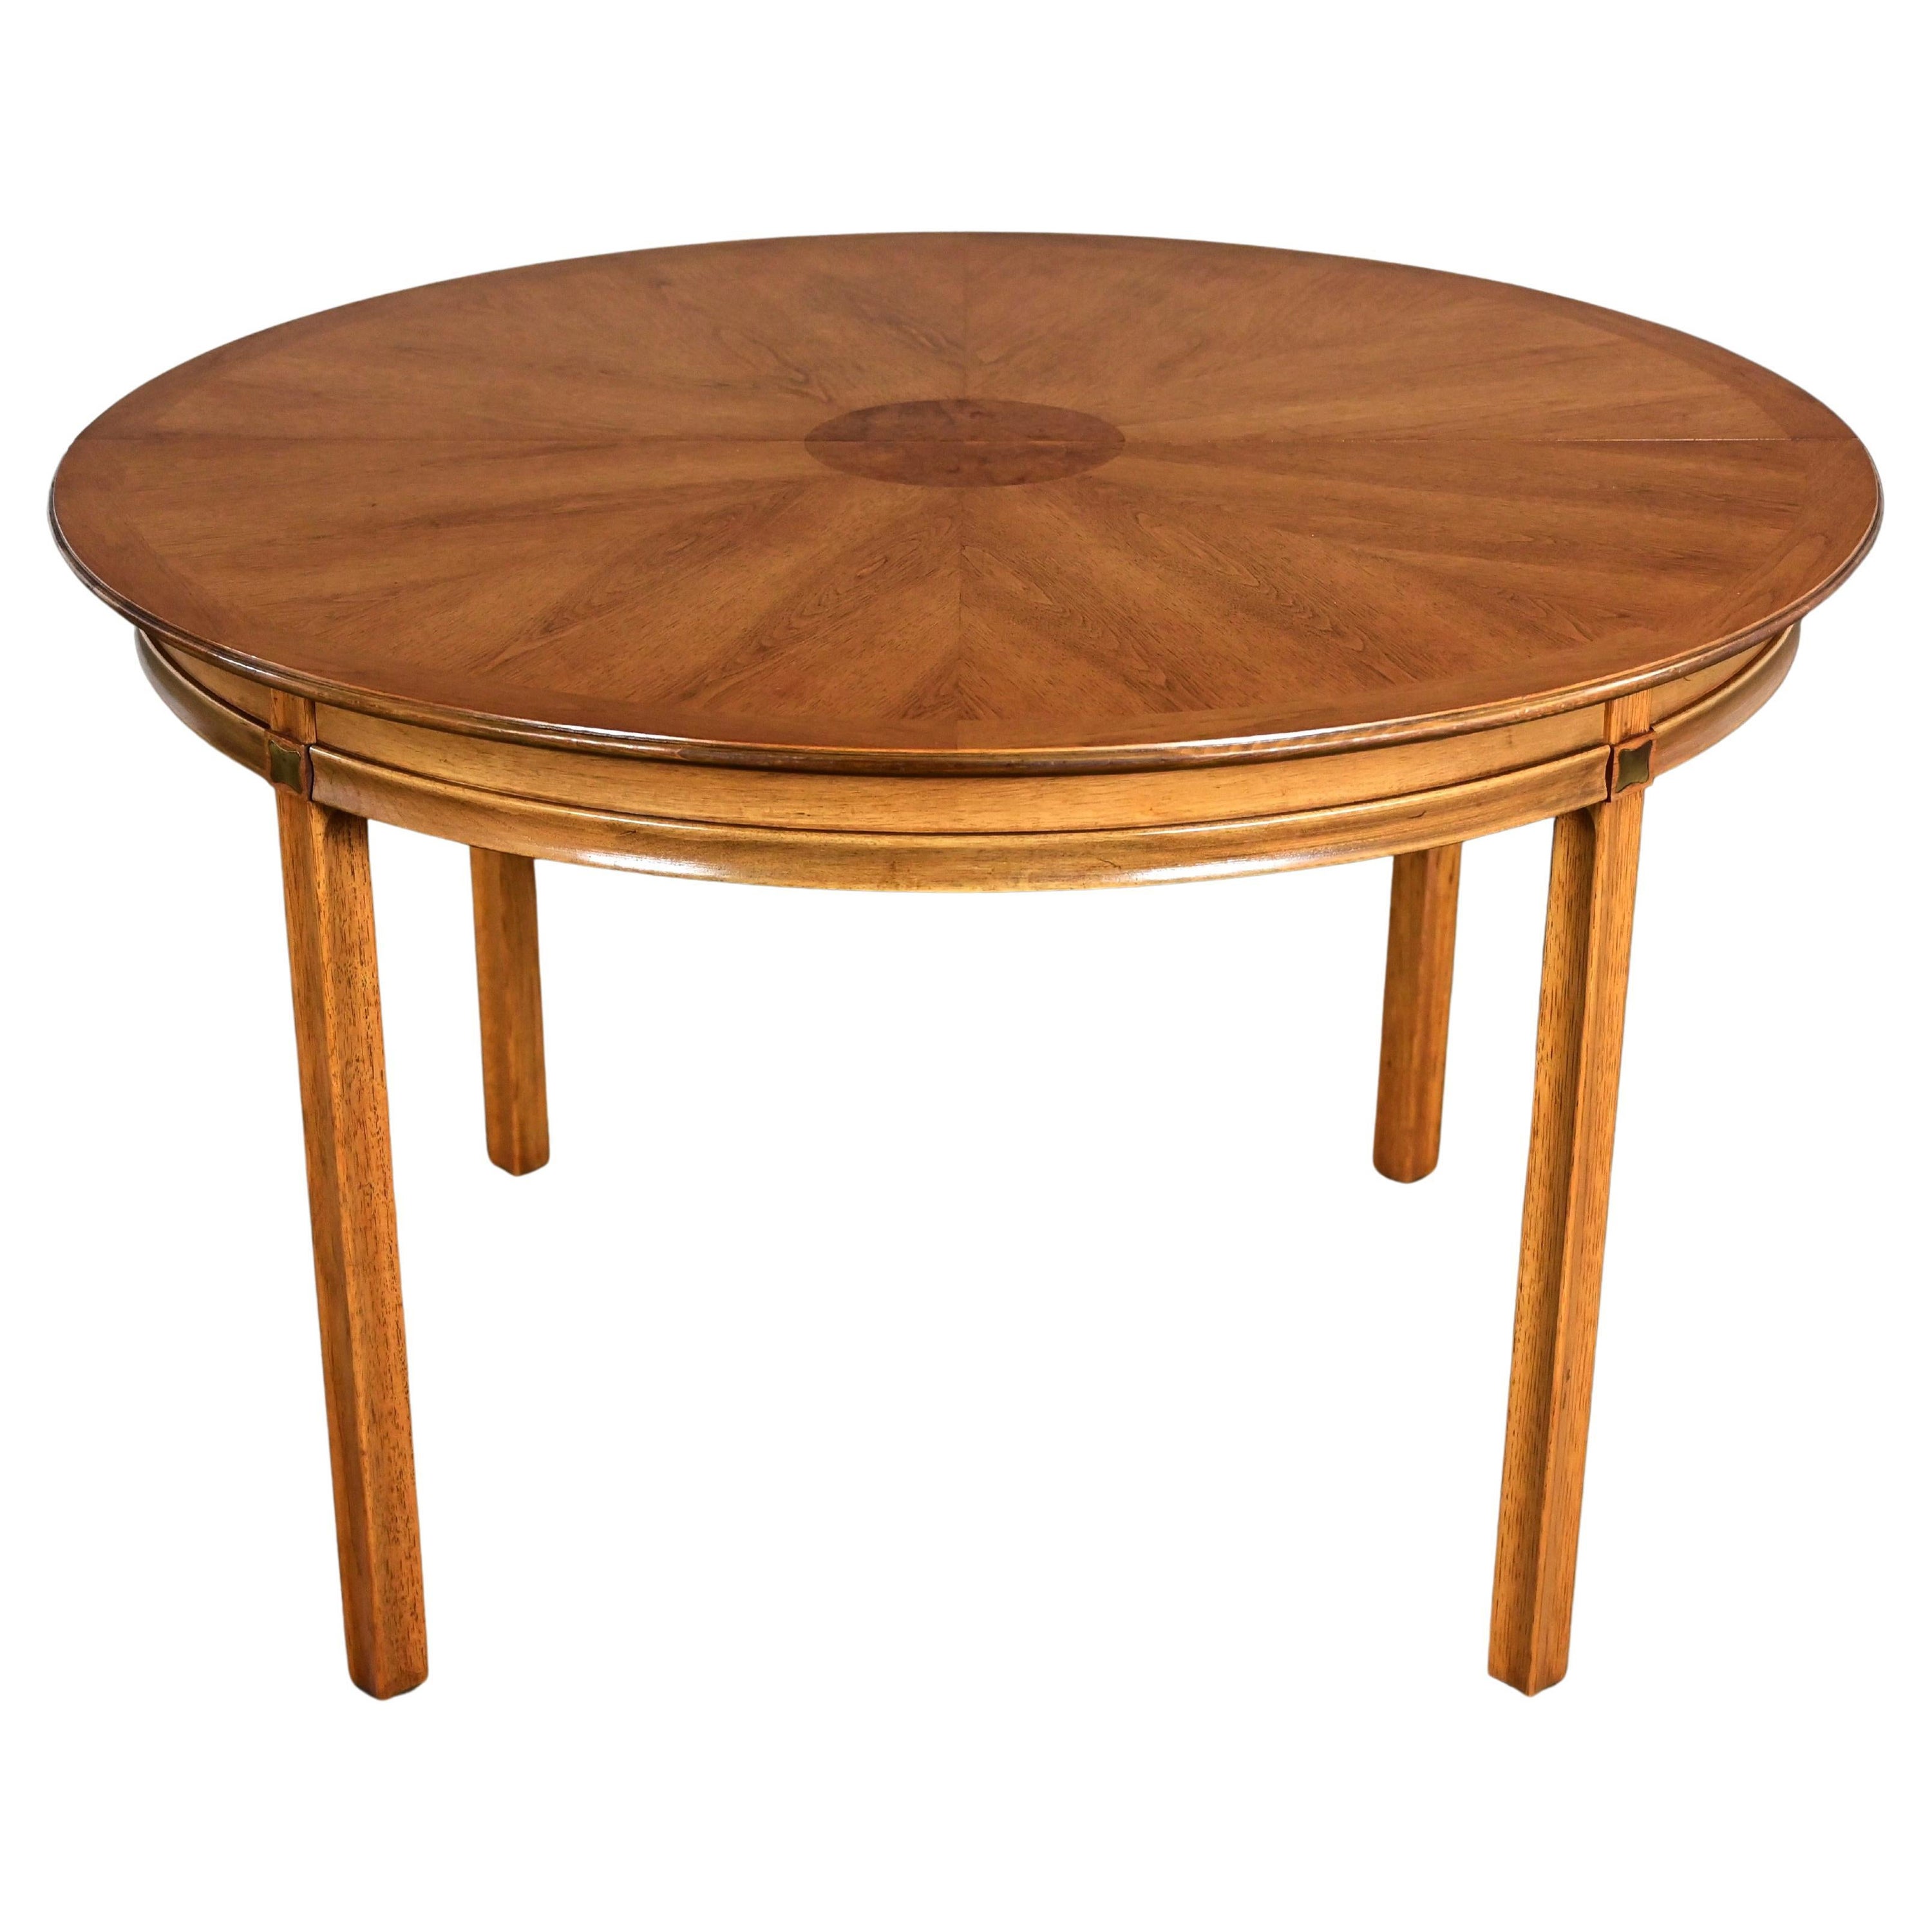 Hollywood Regency Round Extension Dining Table Thomasville Tamerlane Collection 